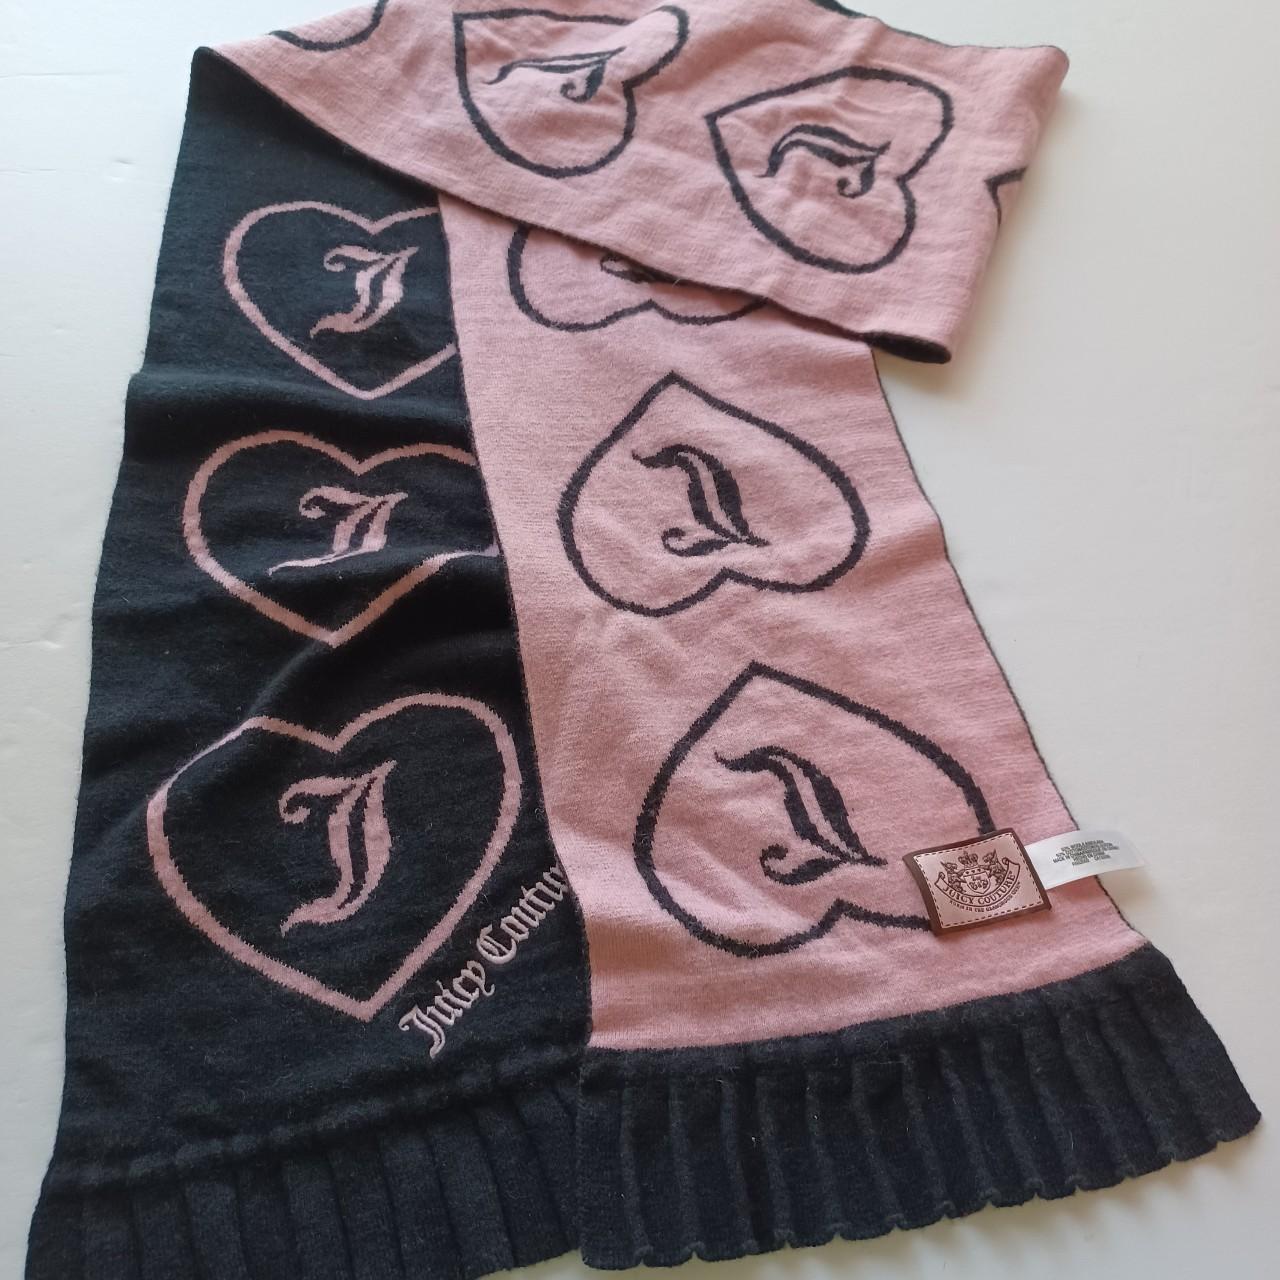 Juicy Couture knitted monogram scarf in pink